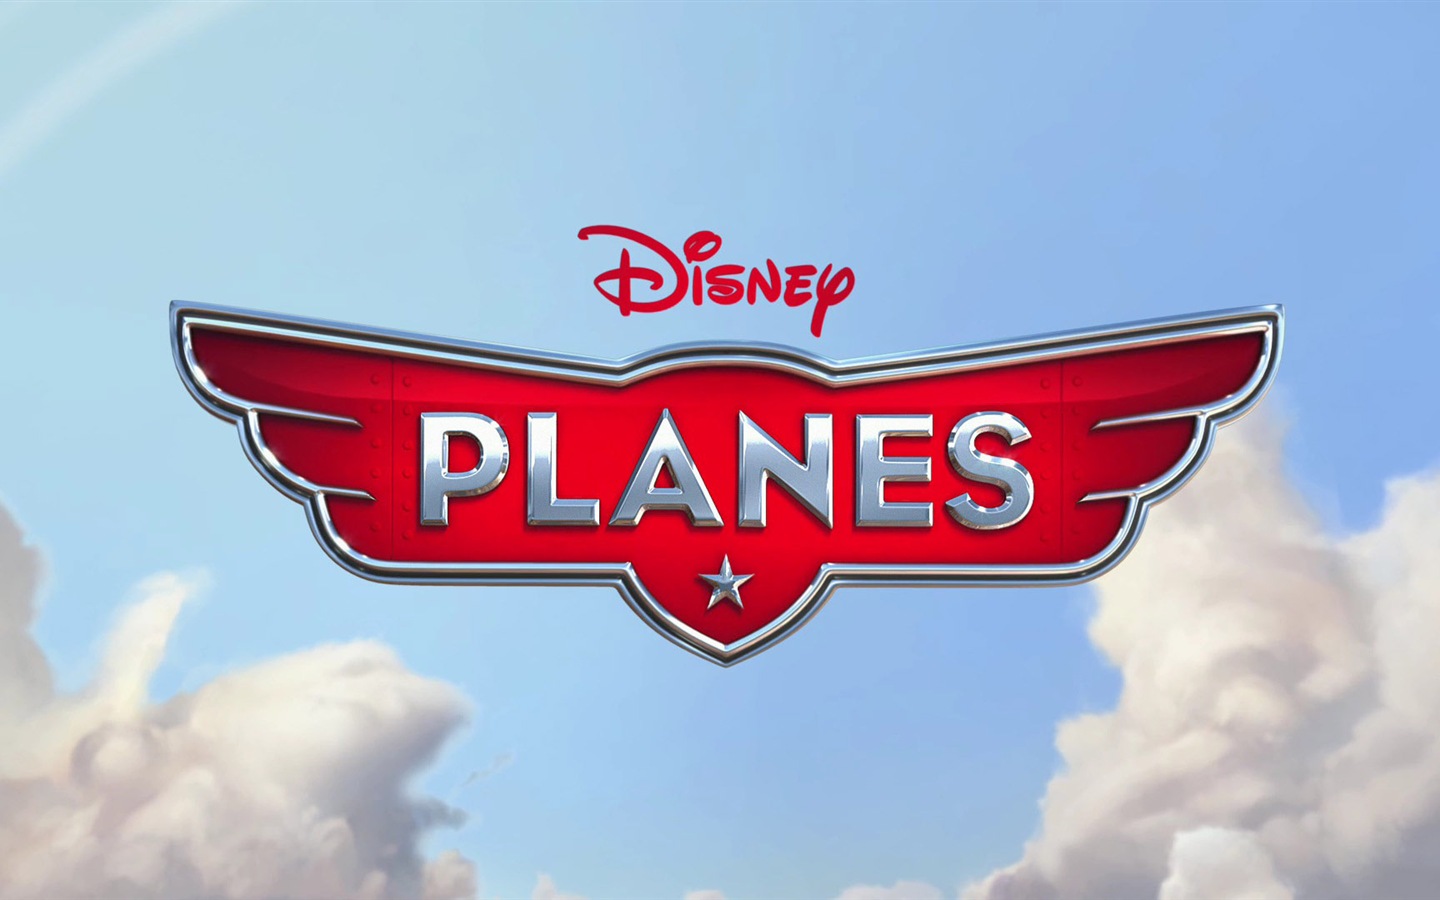 Planes 2013 HD wallpapers #11 - 1440x900